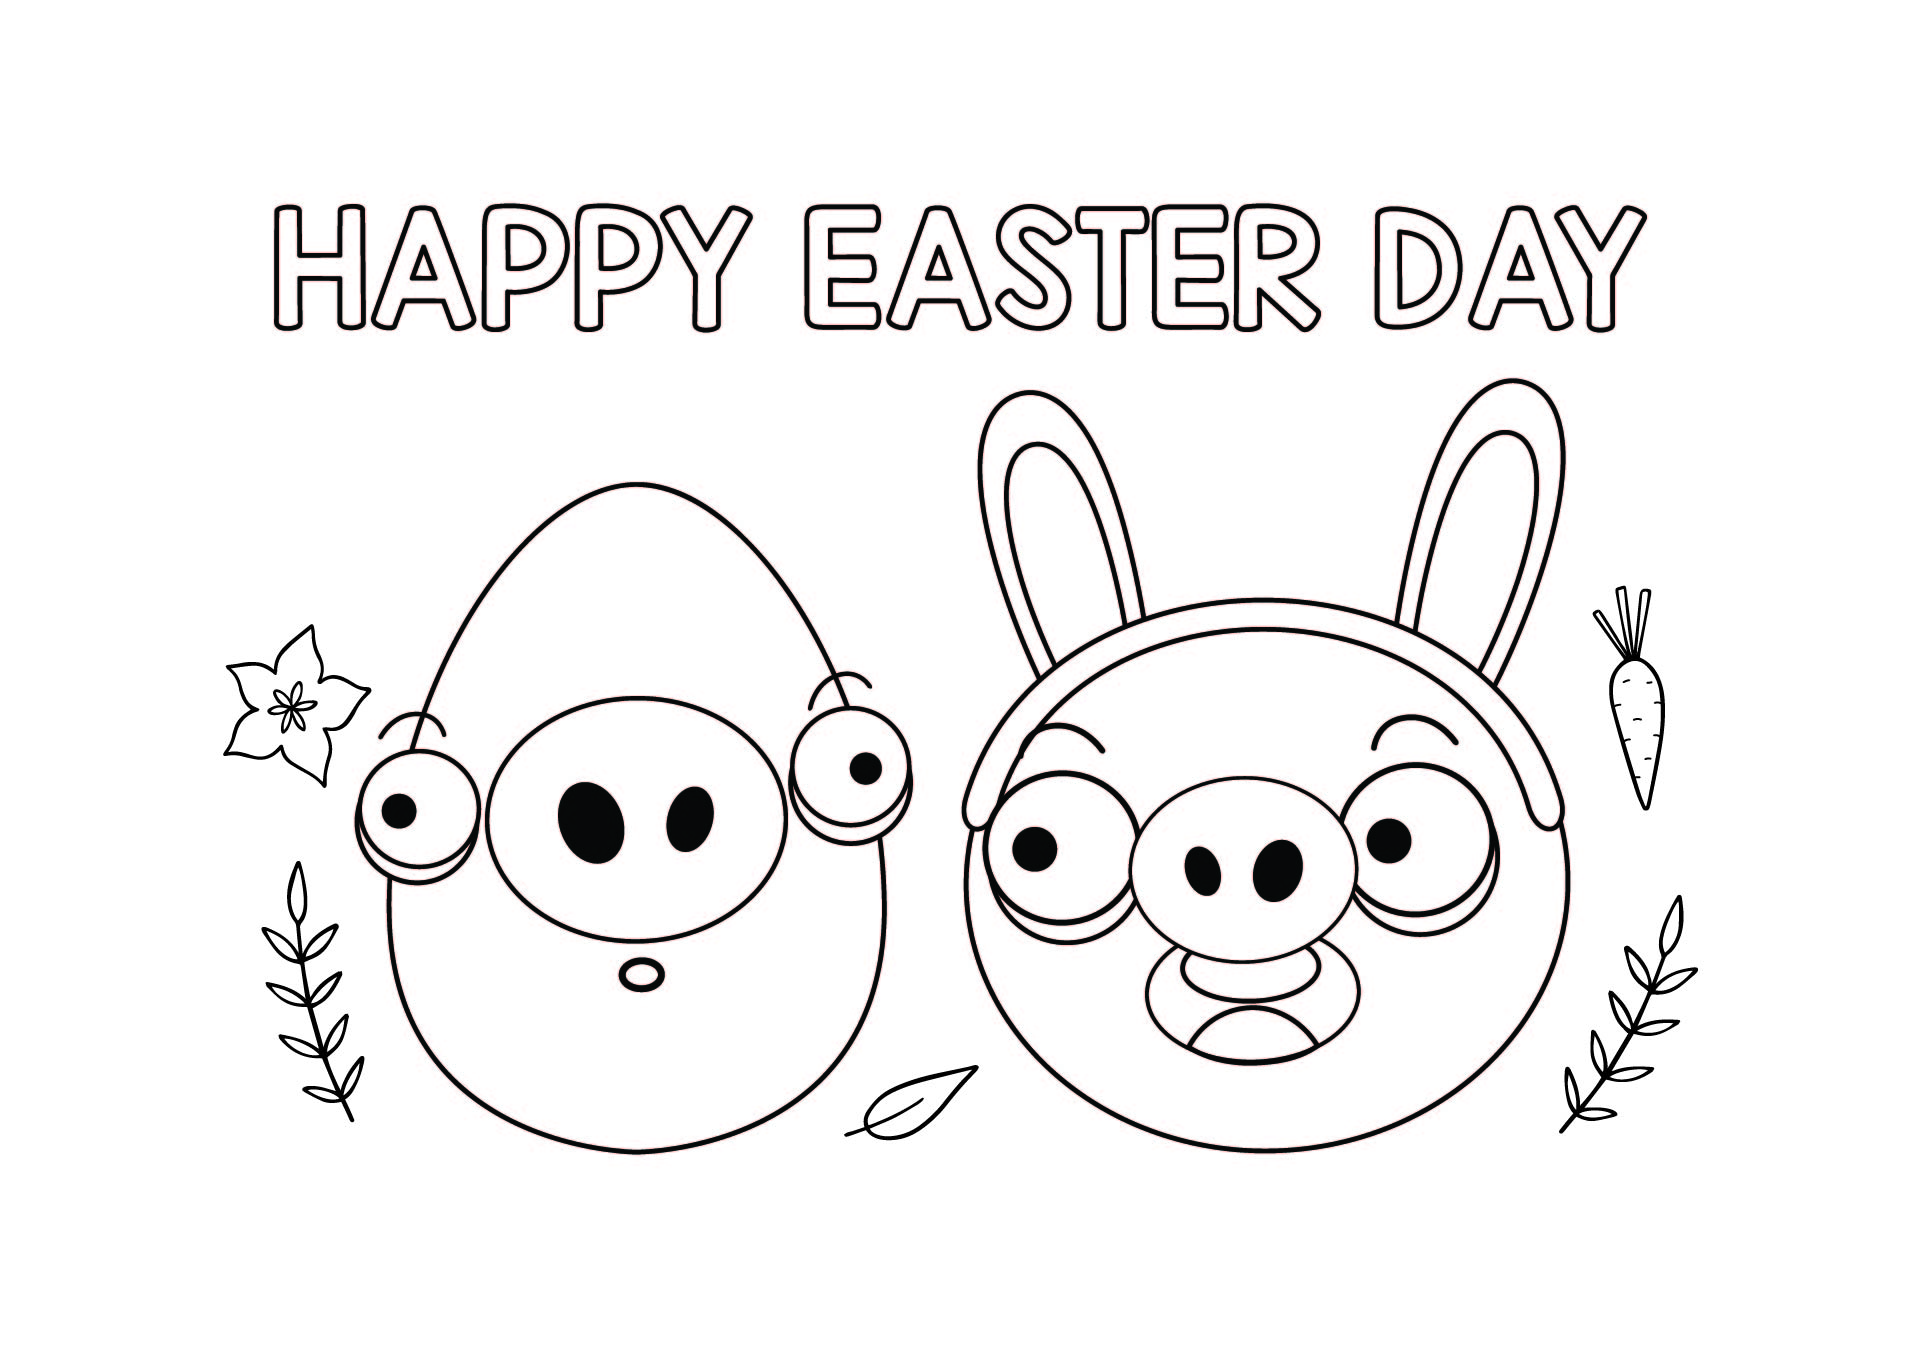 Printable Minion Pig Stealing Easter Eggs Coloring Page